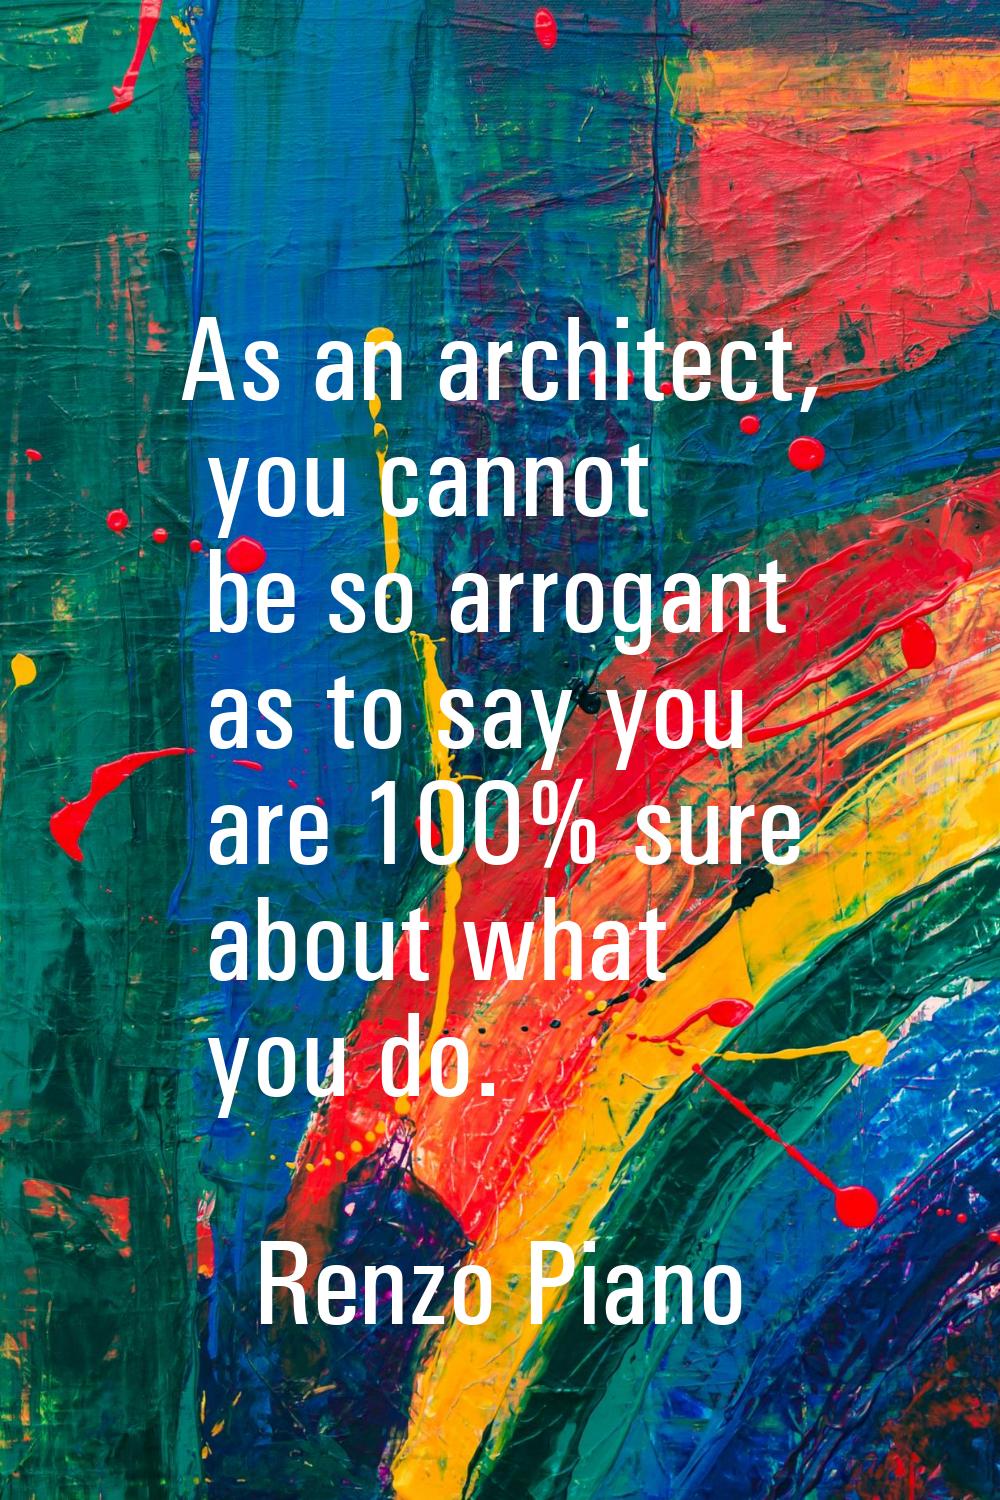 As an architect, you cannot be so arrogant as to say you are 100% sure about what you do.